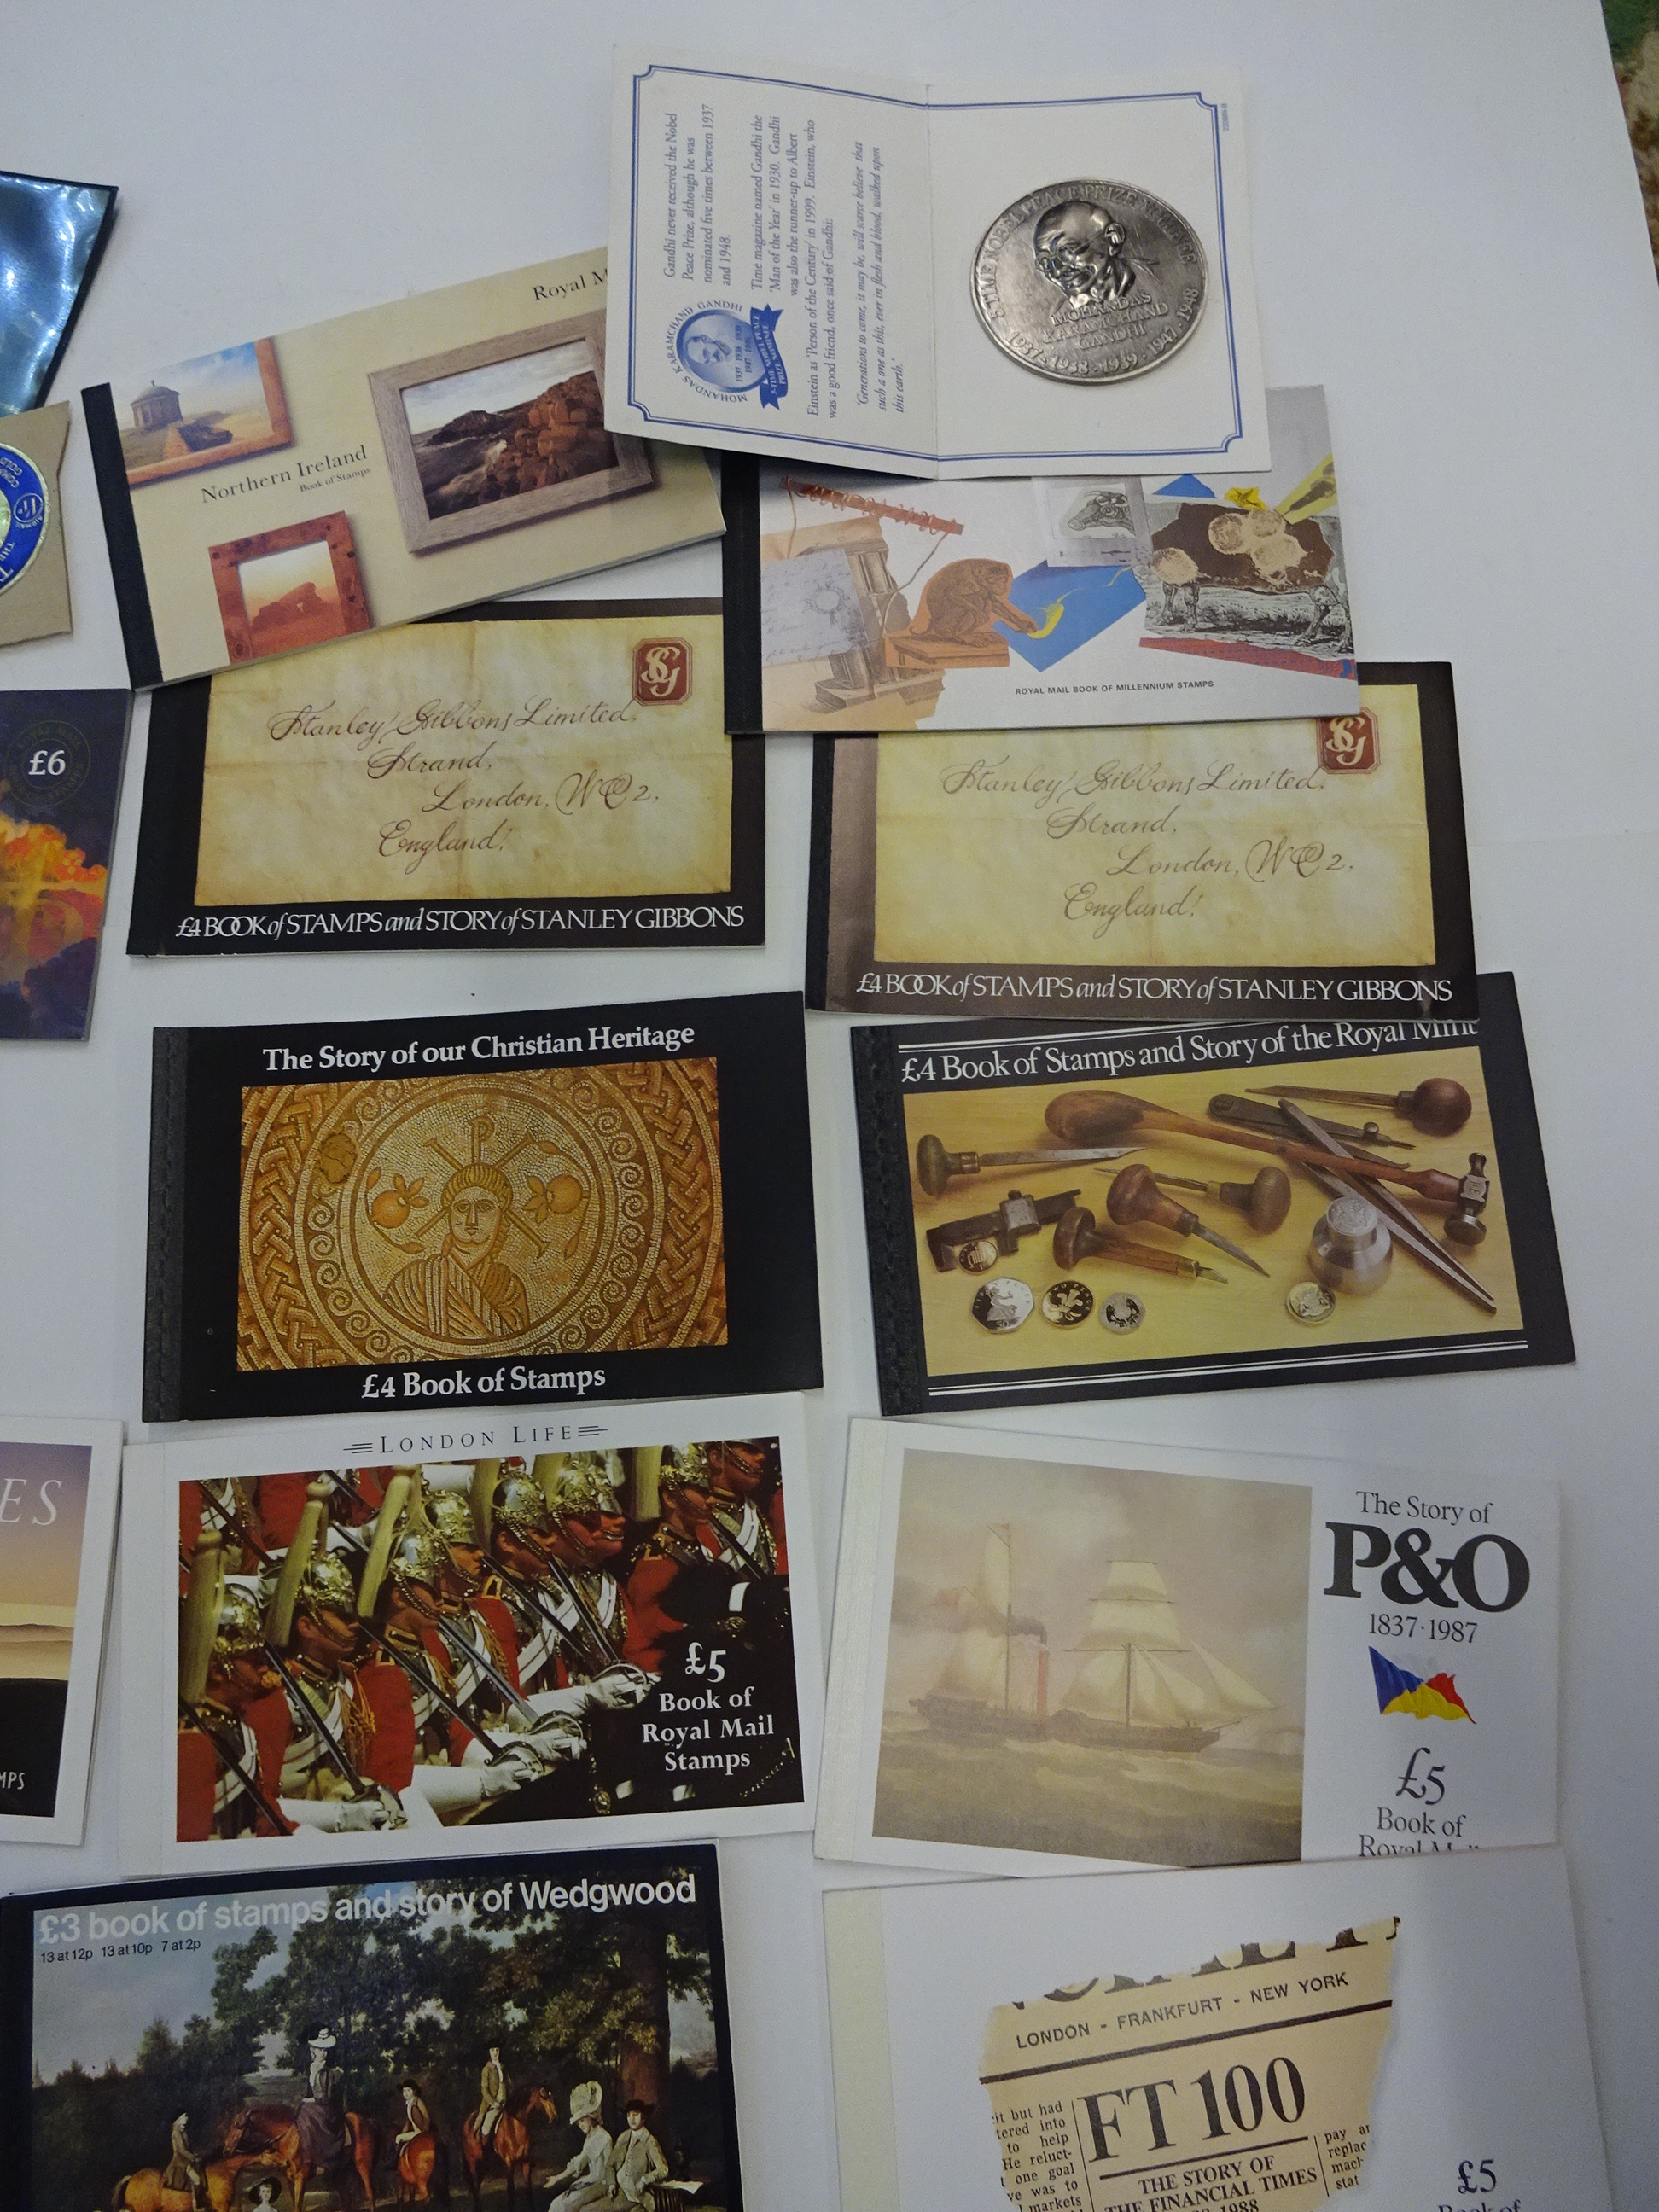 COLLECTION OF STAMPS COINS 1ST DAY COVERS INCLUDING MILITARY ROYALTY FIFA ETC. SOME UNCIRCULATED. - Image 4 of 6